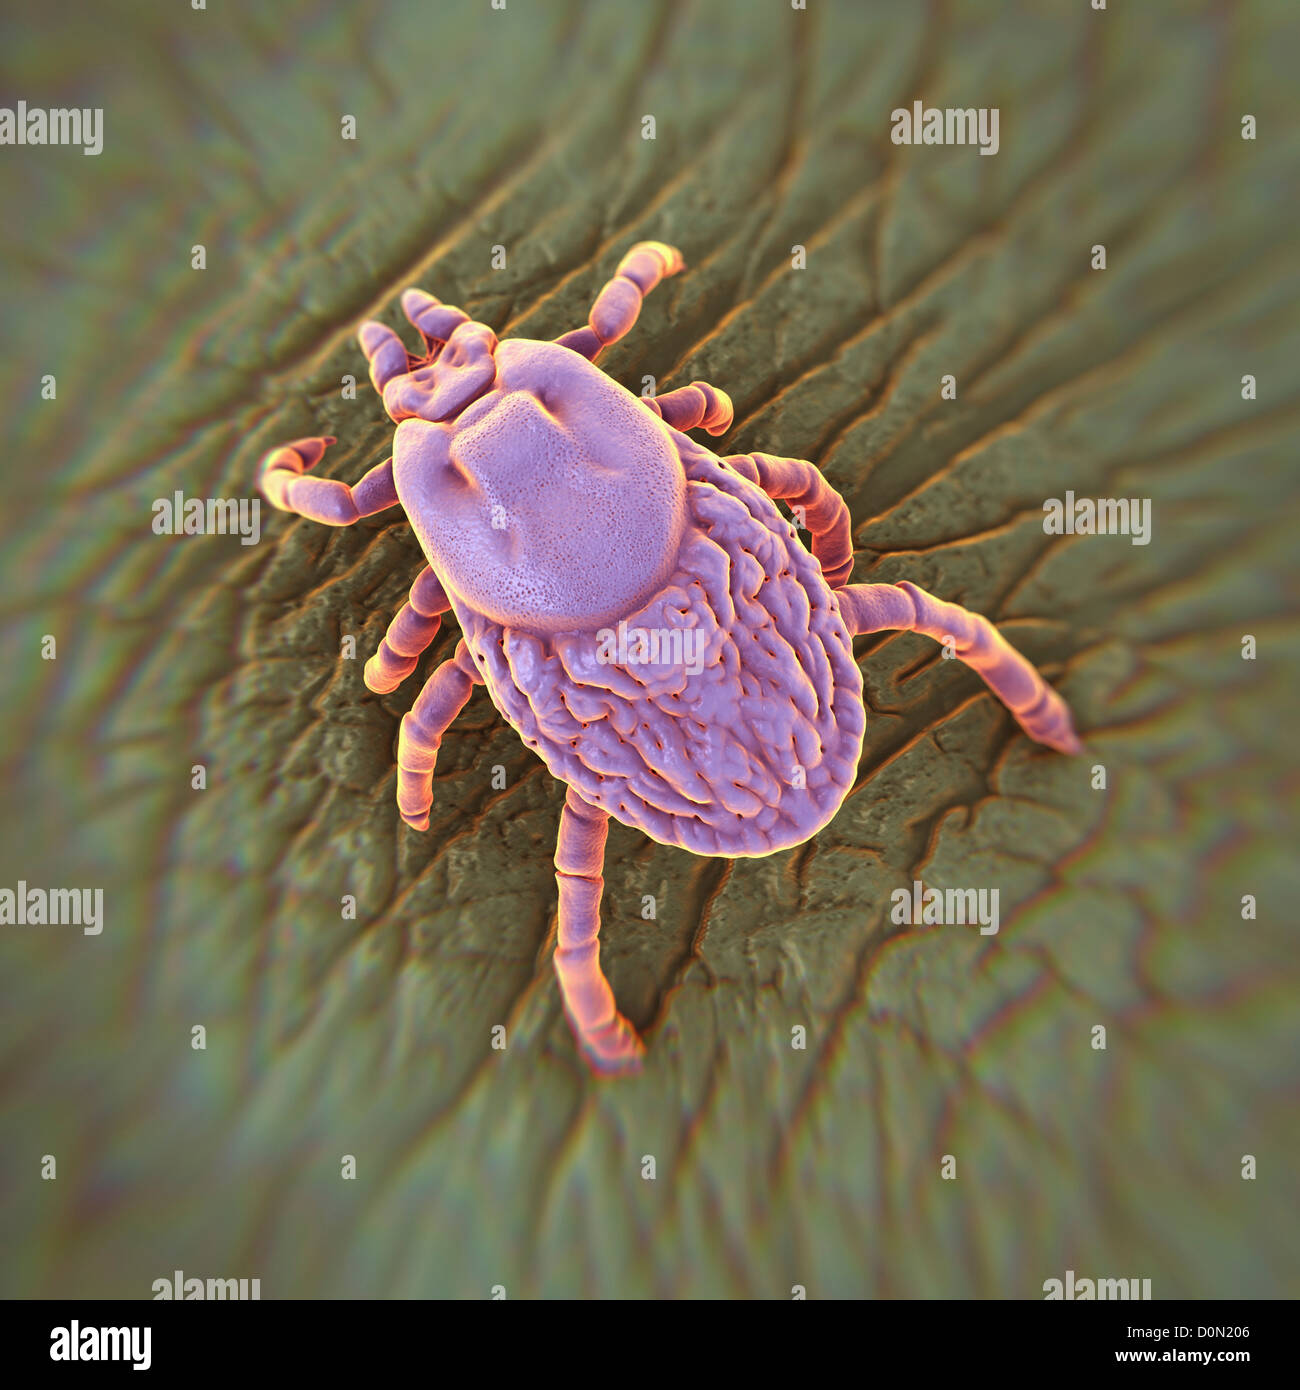 A close up view of a tick (Ixodes), an ectoparasite that lives on the blood of mammals or by hematophagy. Stock Photo